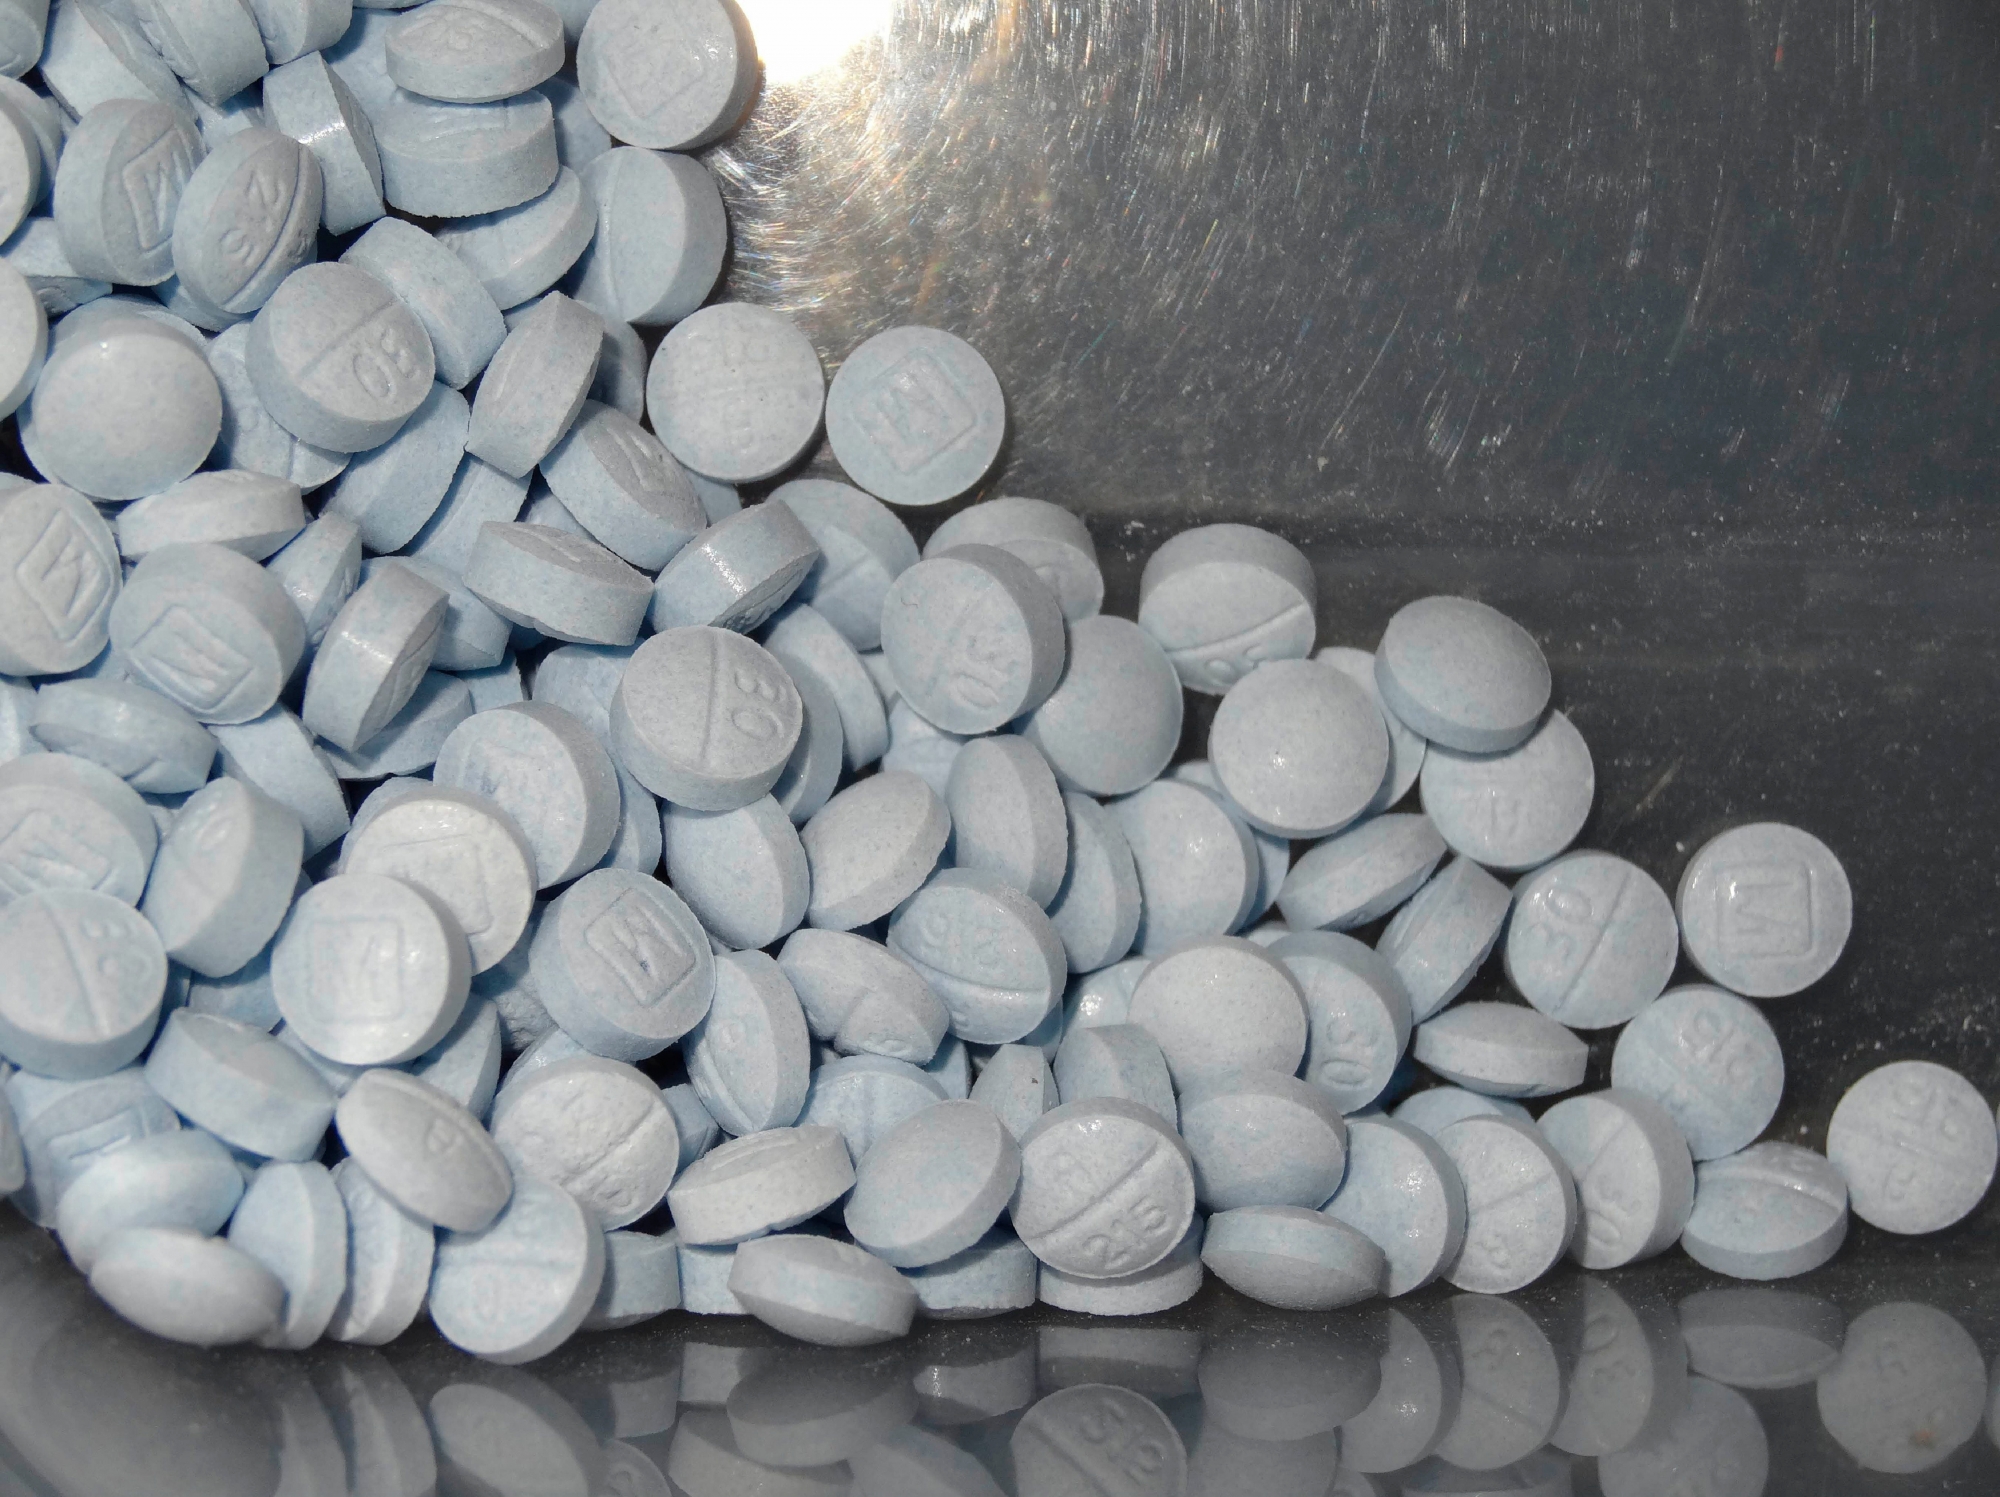 FILE - This undated file photo provided by the U.S. Attorneys Office for Utah and introduced as evidence at a trial shows fentanyl-laced fake oxycodone pills collected during an investigation. Accidental overdoses contribute to 90 percent of all U.S. opioid-related deaths. Rising use of illicitly manufactured and highly potent synthetic opioids including fentanyl has likely contributed to the unintentional death rate, which surged nine-fold between 2000 and 2017, the study found. (U.S. Attorneys Office for Utah via AP, File) OPIOID DEATHS